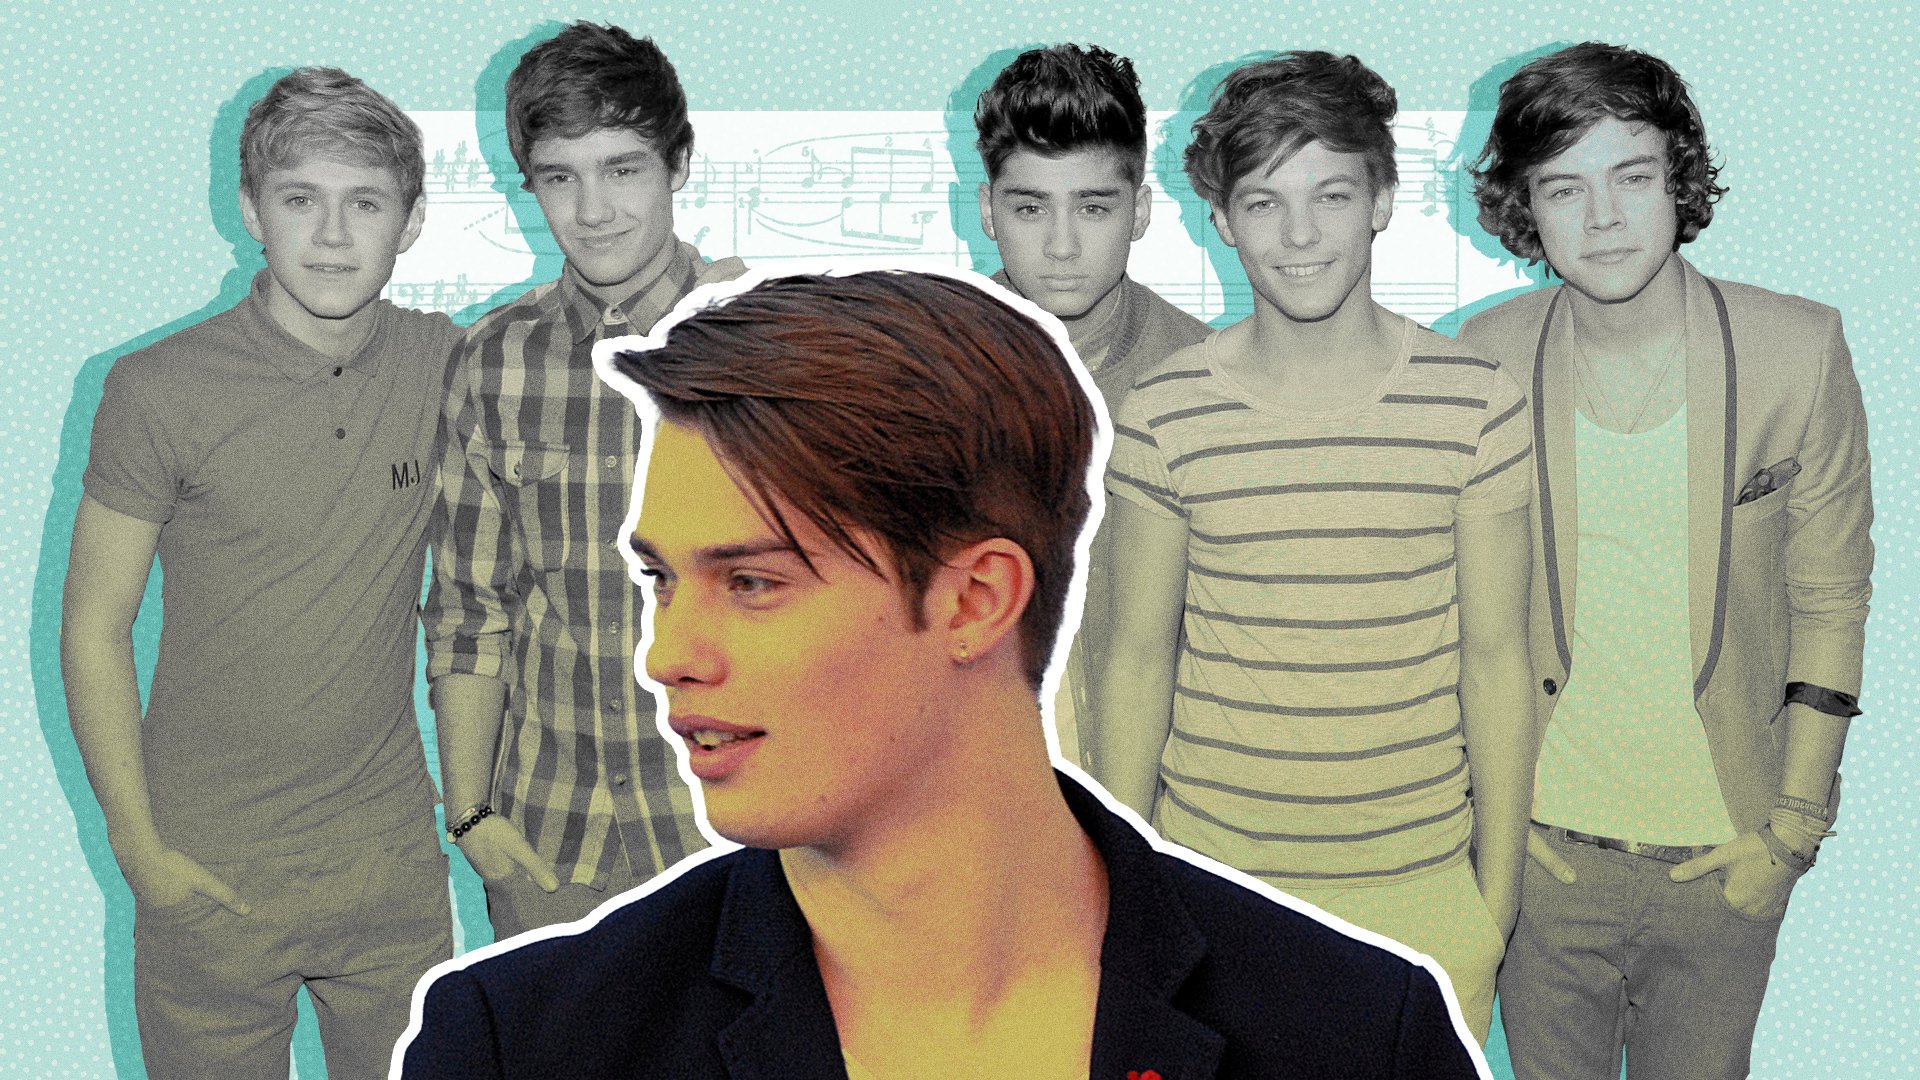 Nicholas Galitzine in front of the members of One Direction and music notes. 